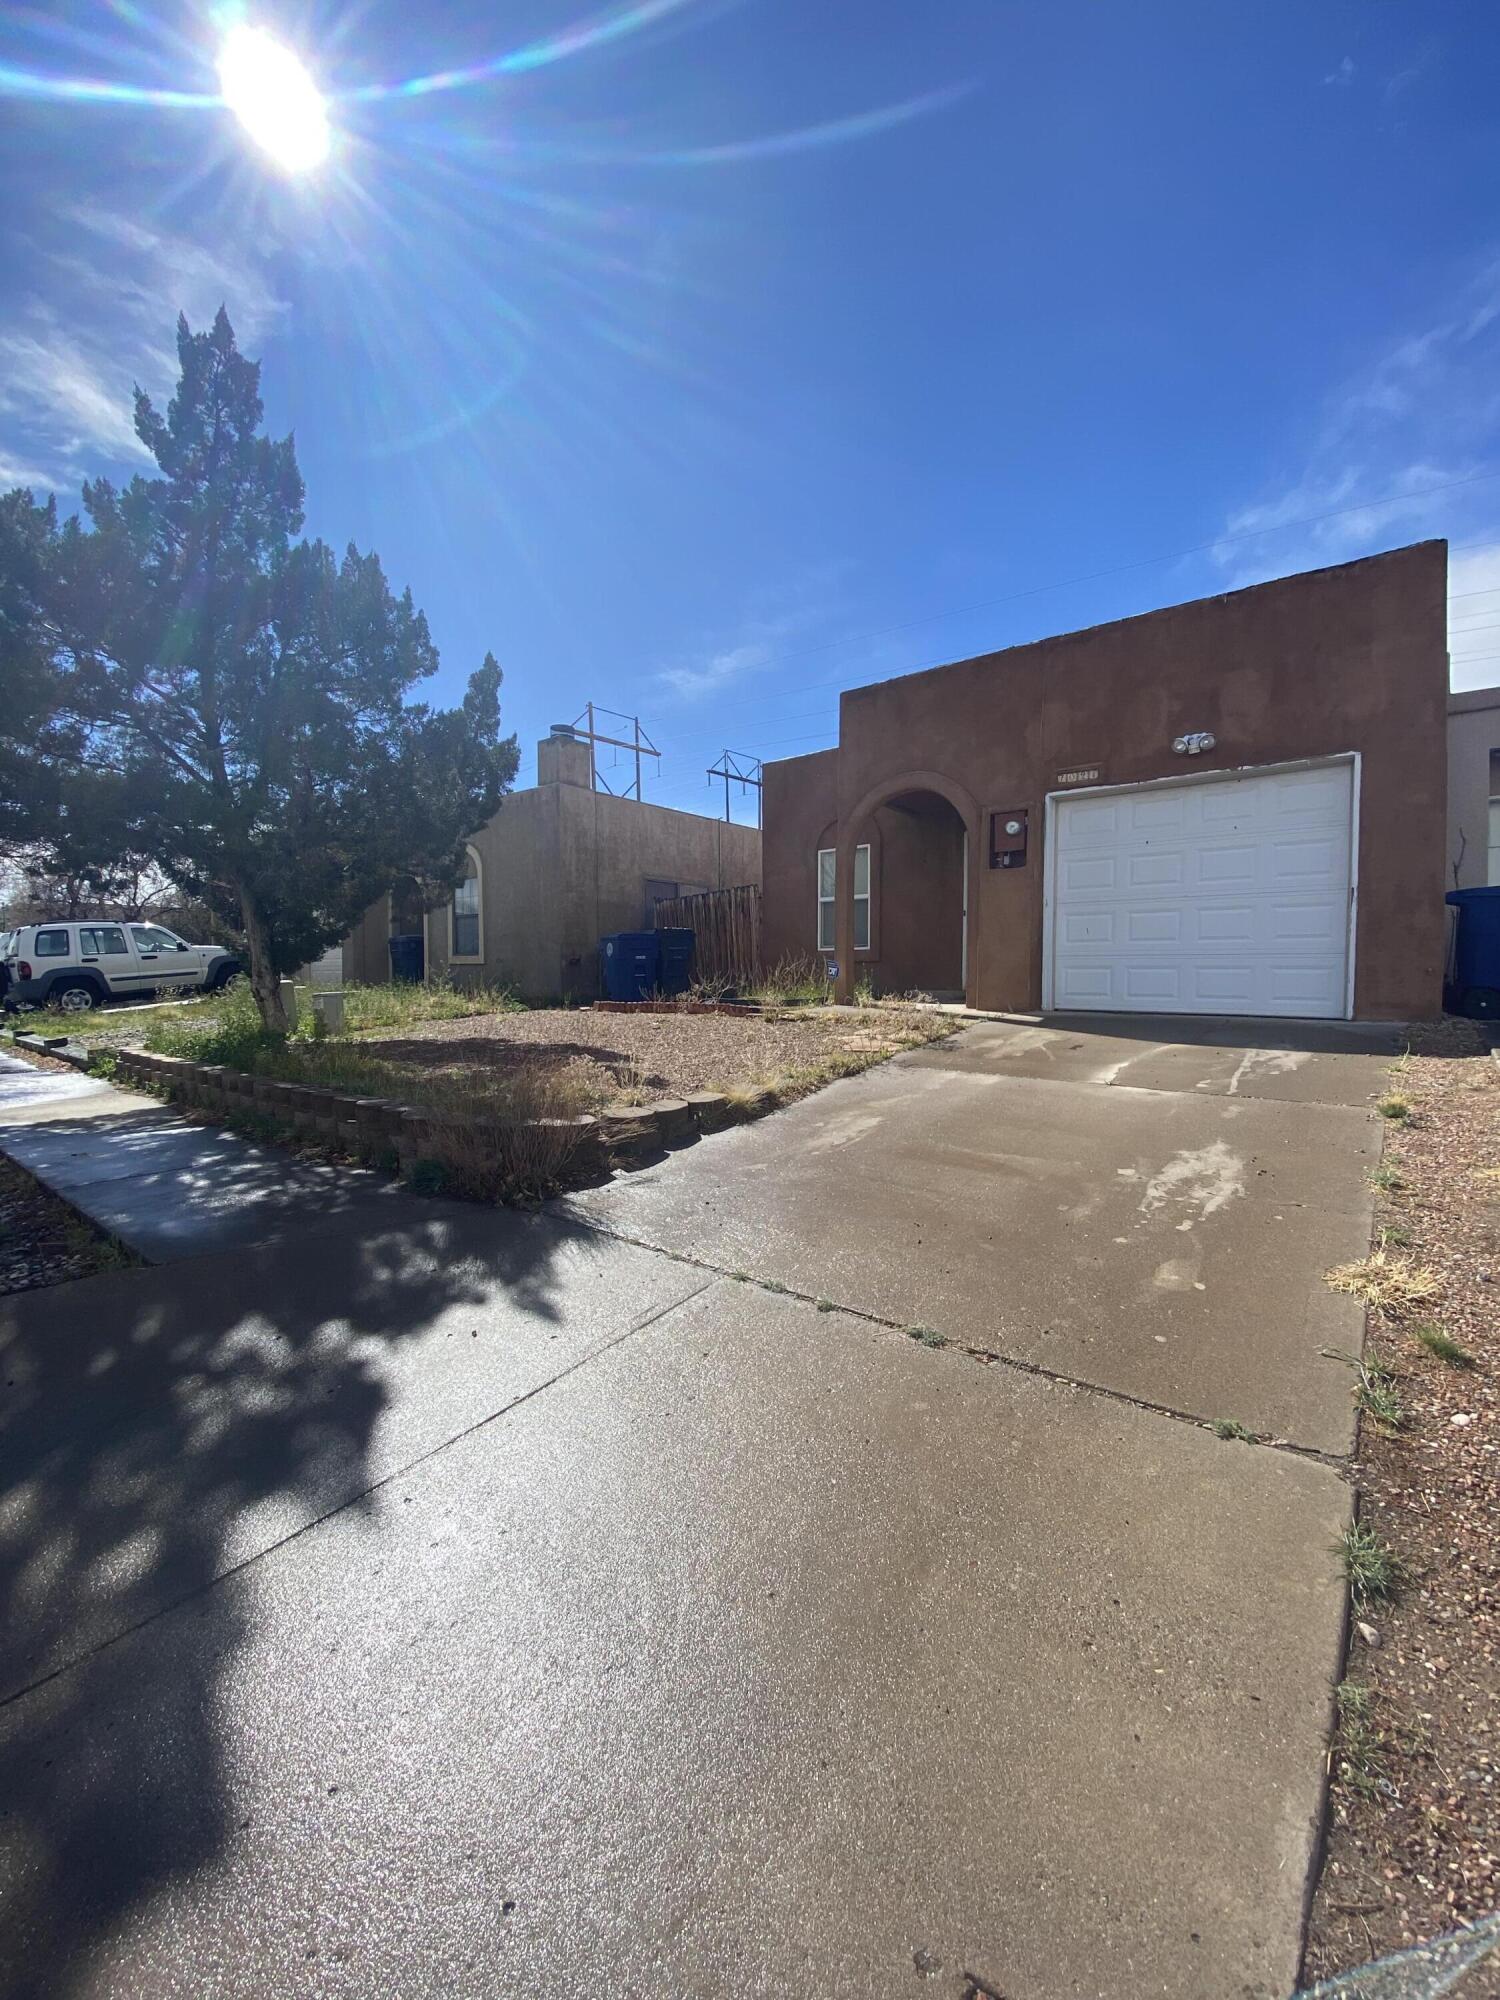 7021 Cleghorn Road NW, Albuquerque, New Mexico 87120, 3 Bedrooms Bedrooms, ,2 BathroomsBathrooms,Residential,For Sale,7021 Cleghorn Road NW,1059839